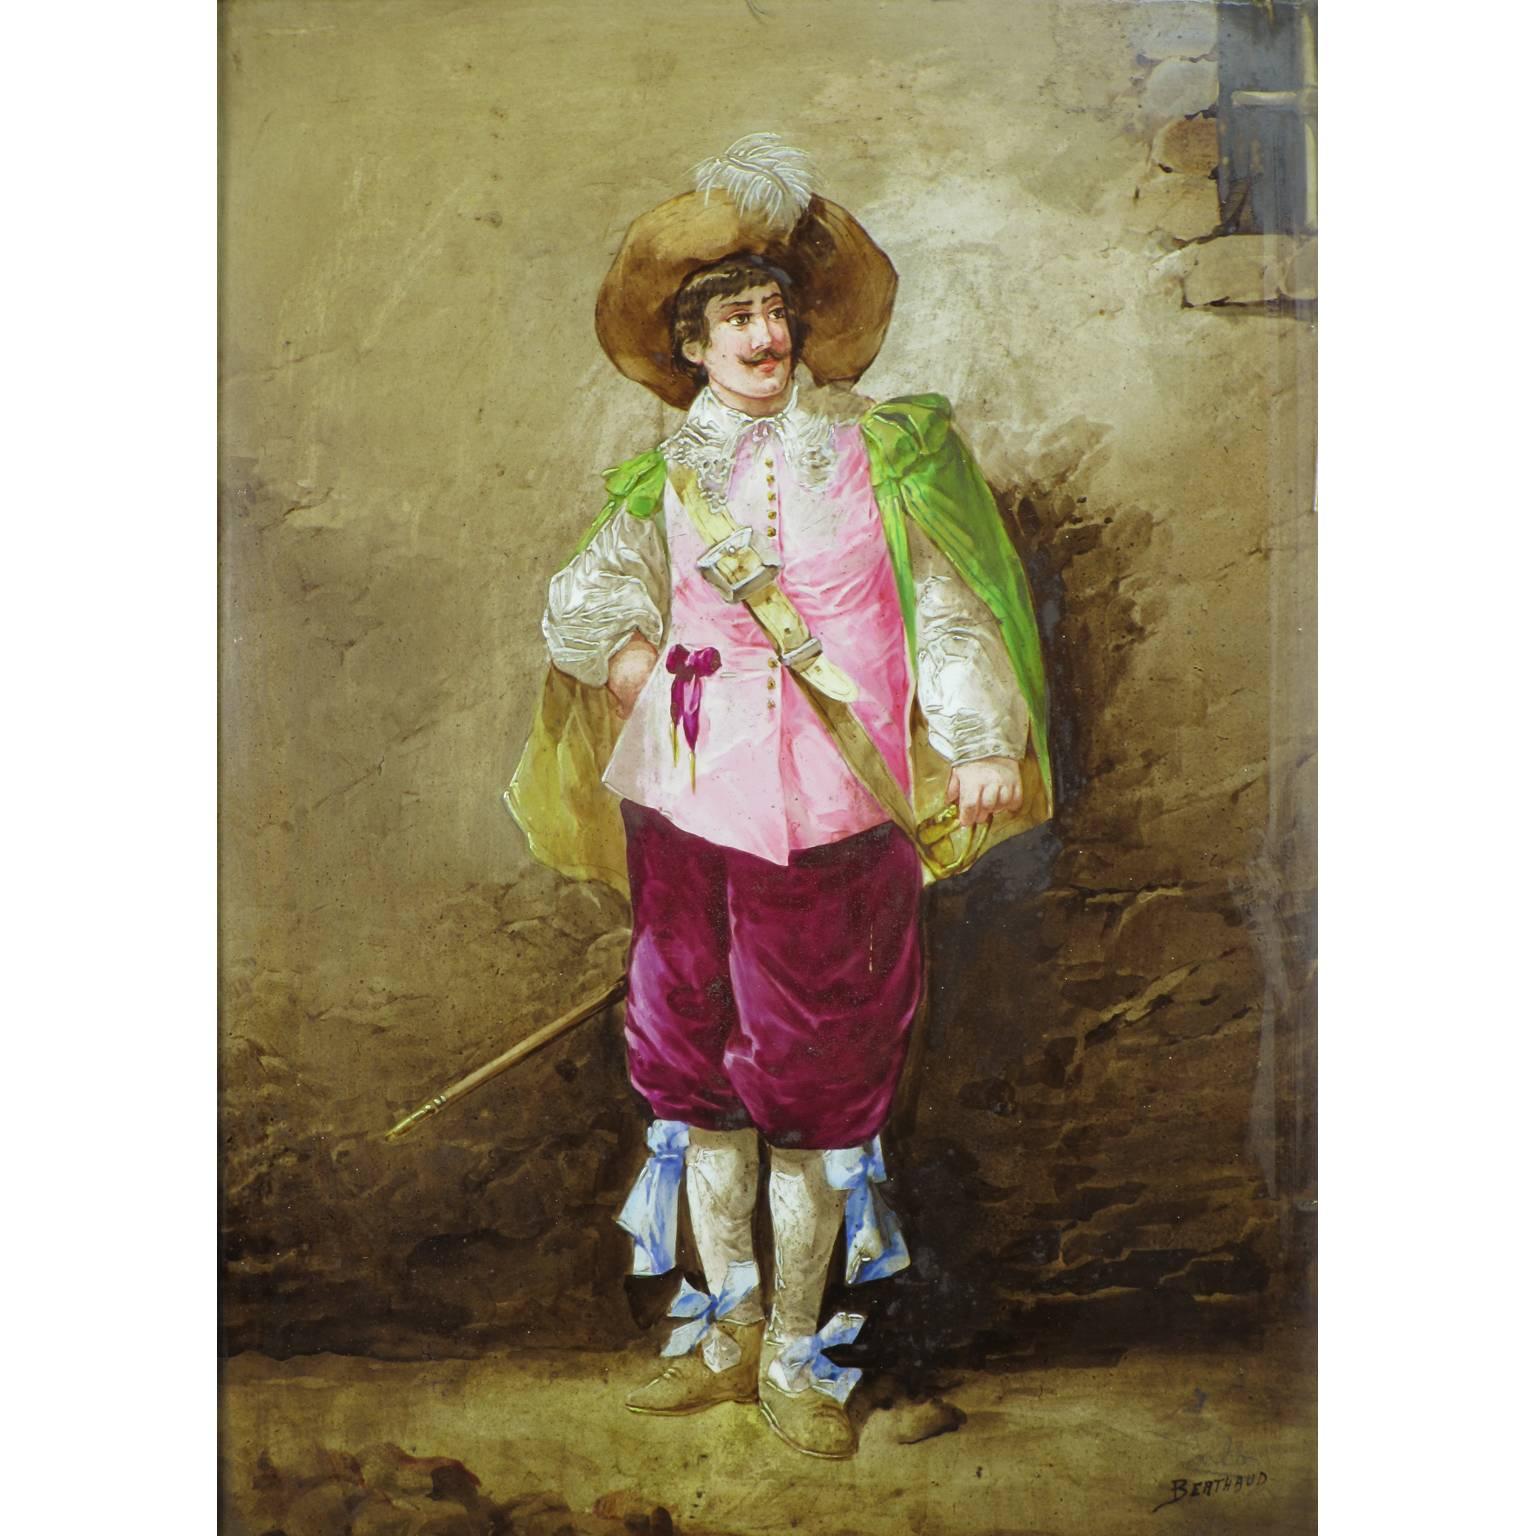 Leon Berthaud (French, 19th century). Pair of French porcelain plaques of Musketeers, each depicting a standing Musketeer in his 18th century costume, each within an ebonized carved wood frame. Both signed: Berthaud, circa 1890.

Measures: Plaque